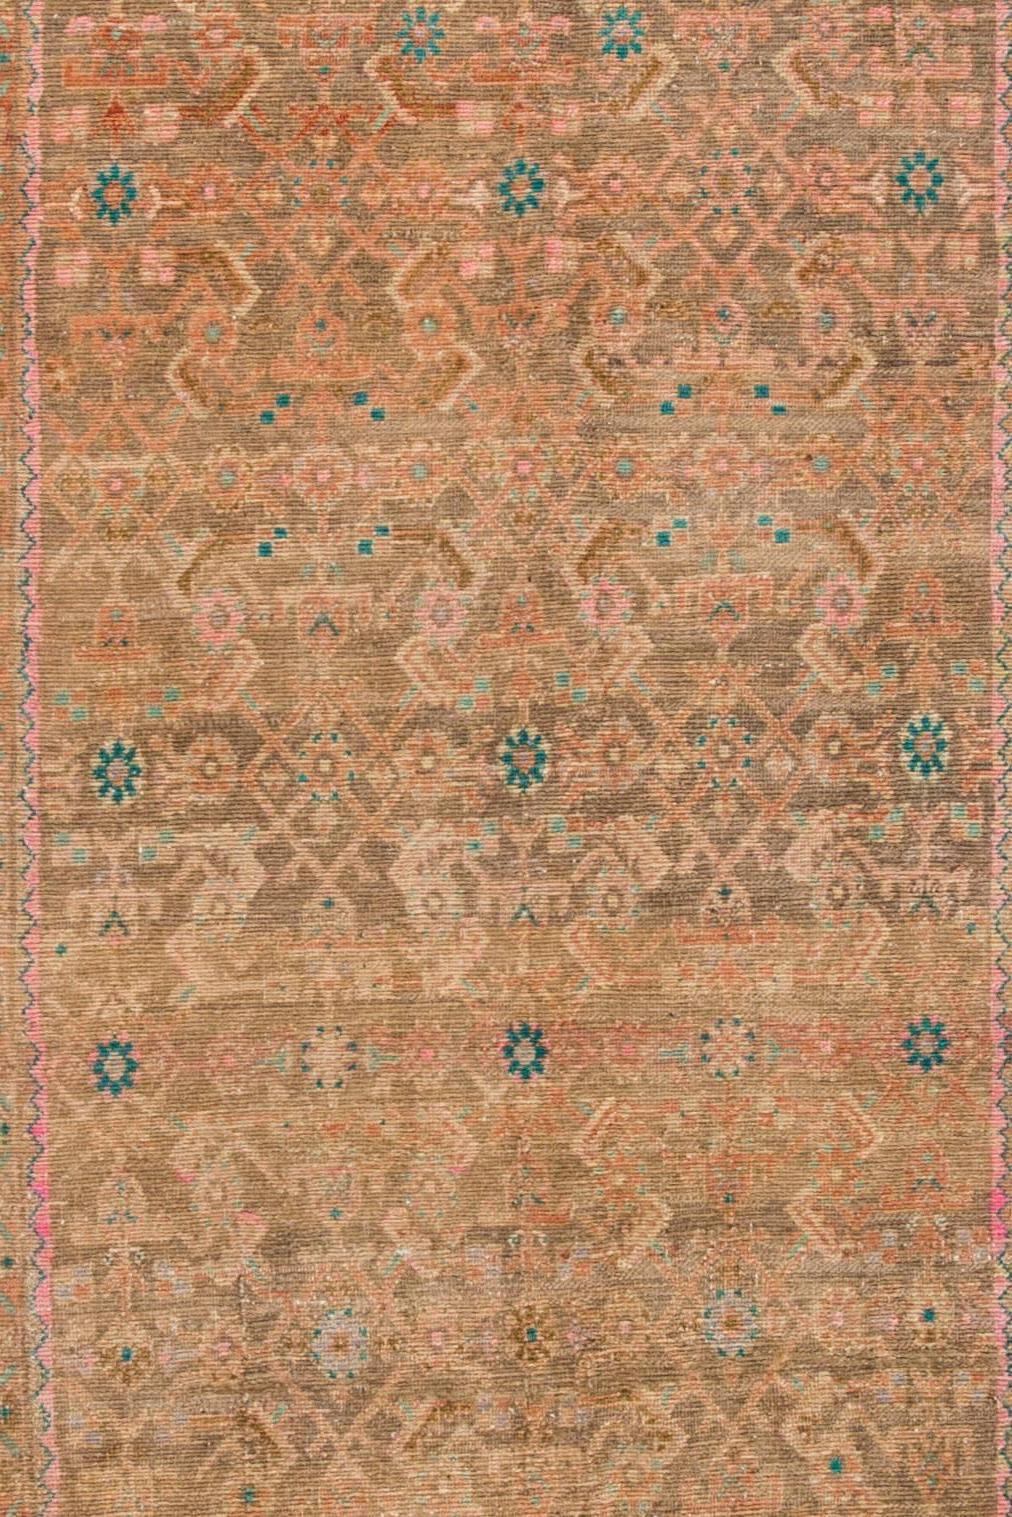 Vintage Distressed Beige Persian Tabriz Carpet In Excellent Condition For Sale In Norwalk, CT